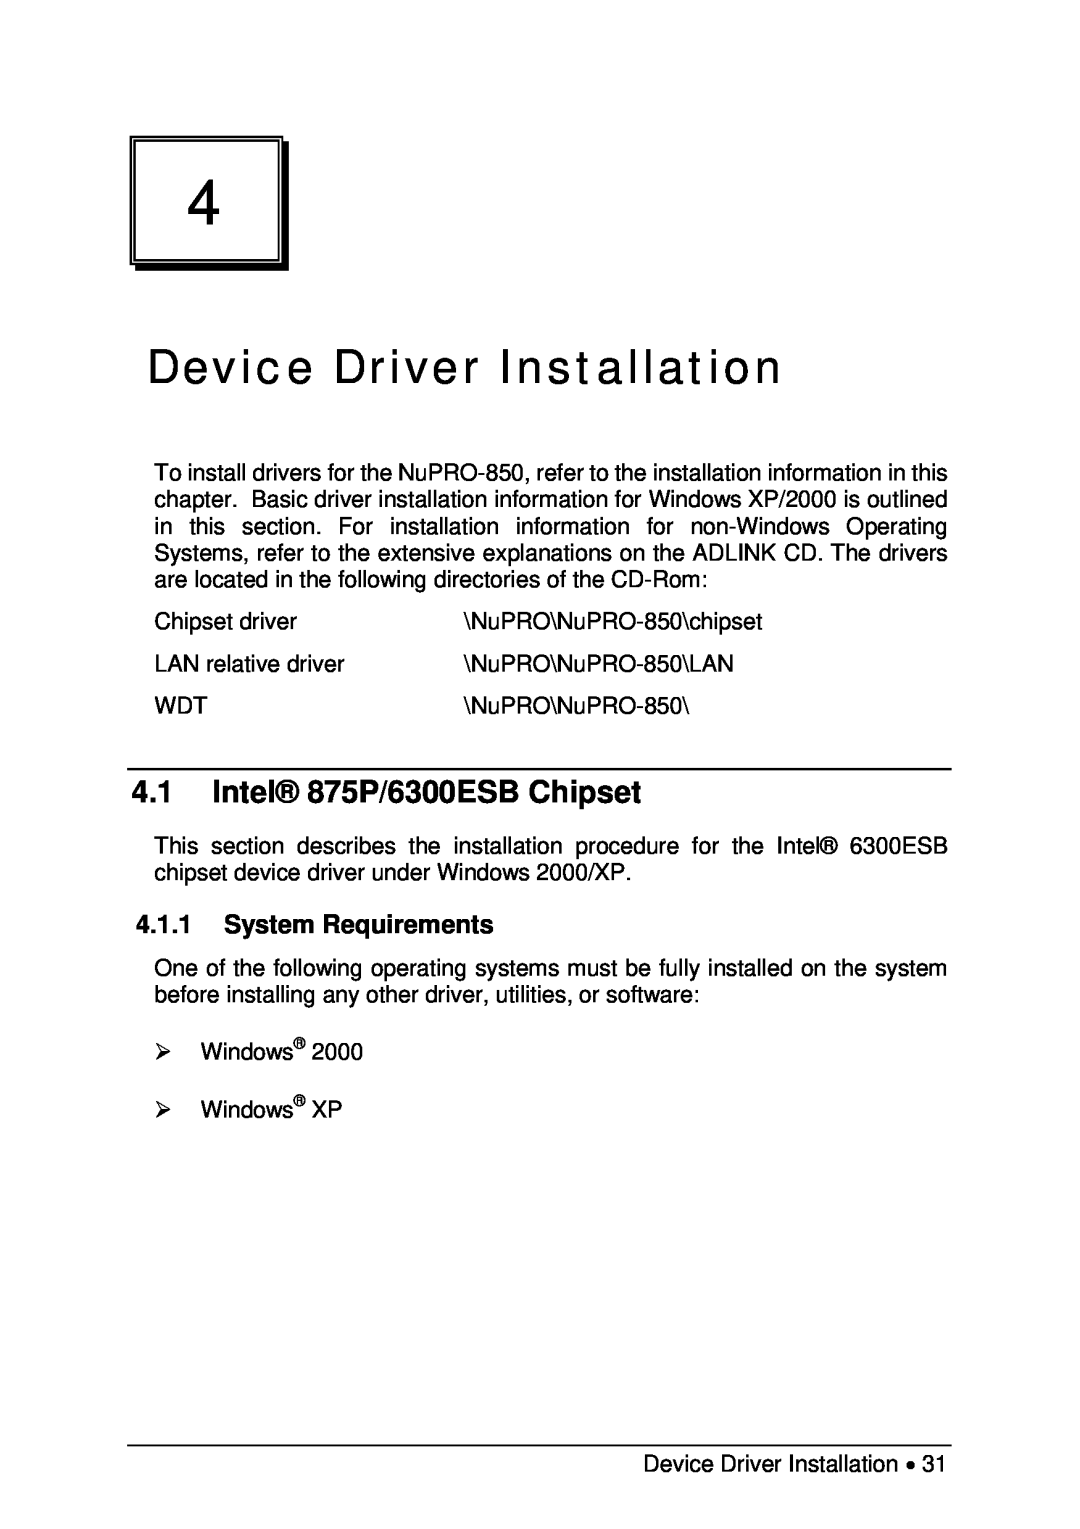 Intel NuPRO-850 user manual Device Driver Installation, Intel 875P/6300ESB Chipset, System Requirements 